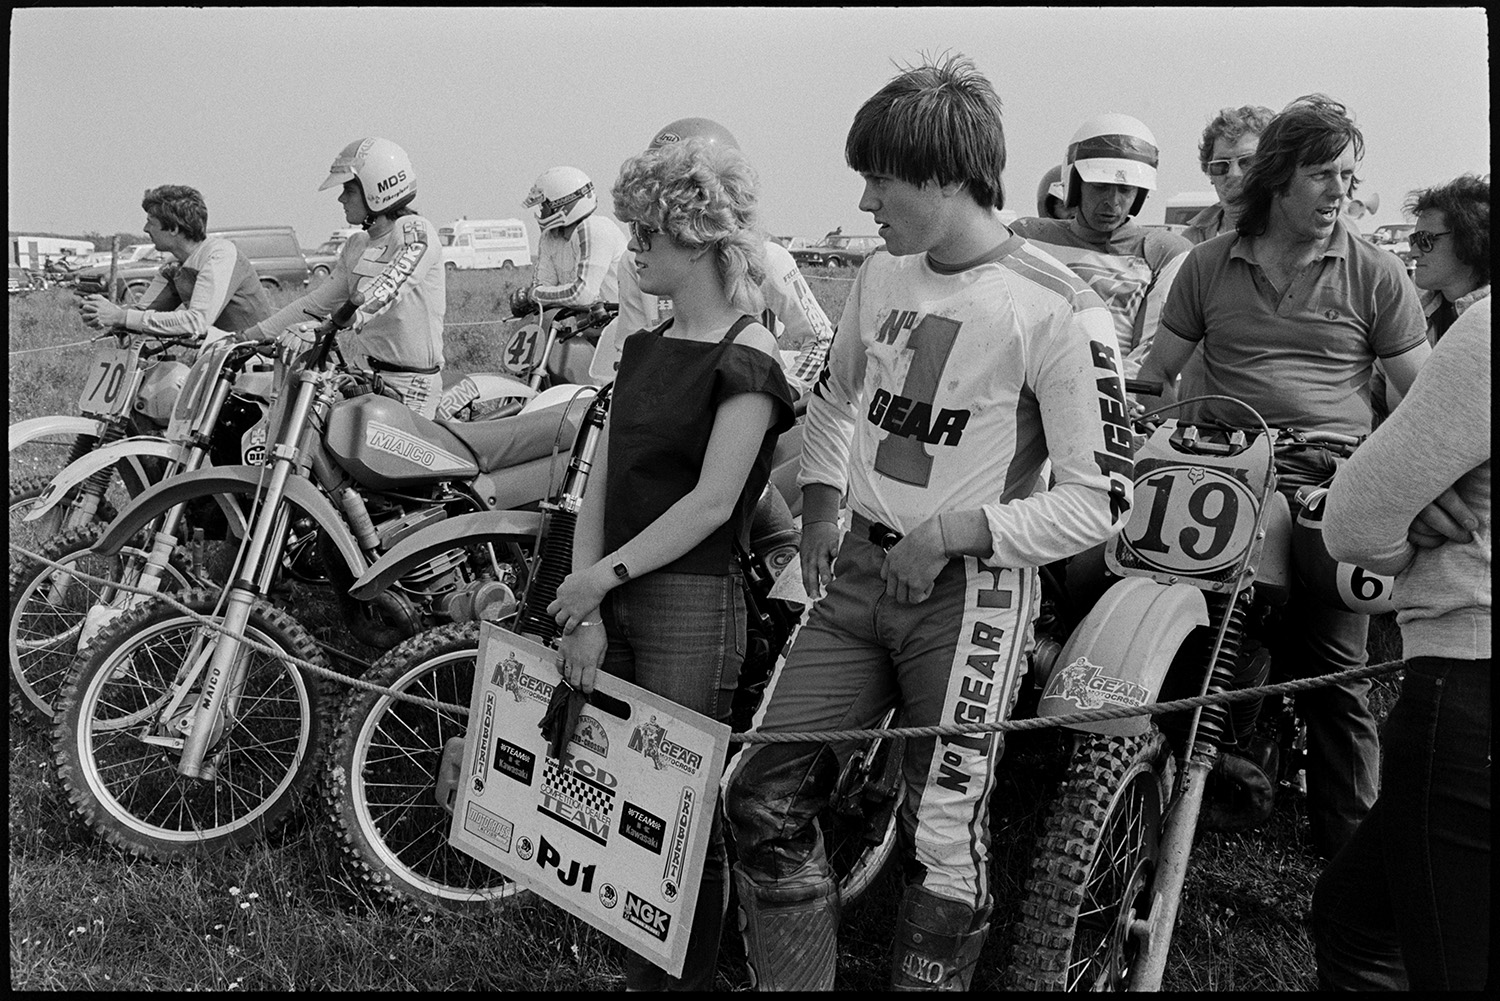 Motorcycle scramble competitors waiting to start racing and jumping at start line. 
[Competitors waiting at the start line of a motorcycle scramble race in a field at Torrington. A woman is stood at the front holding a placard.]